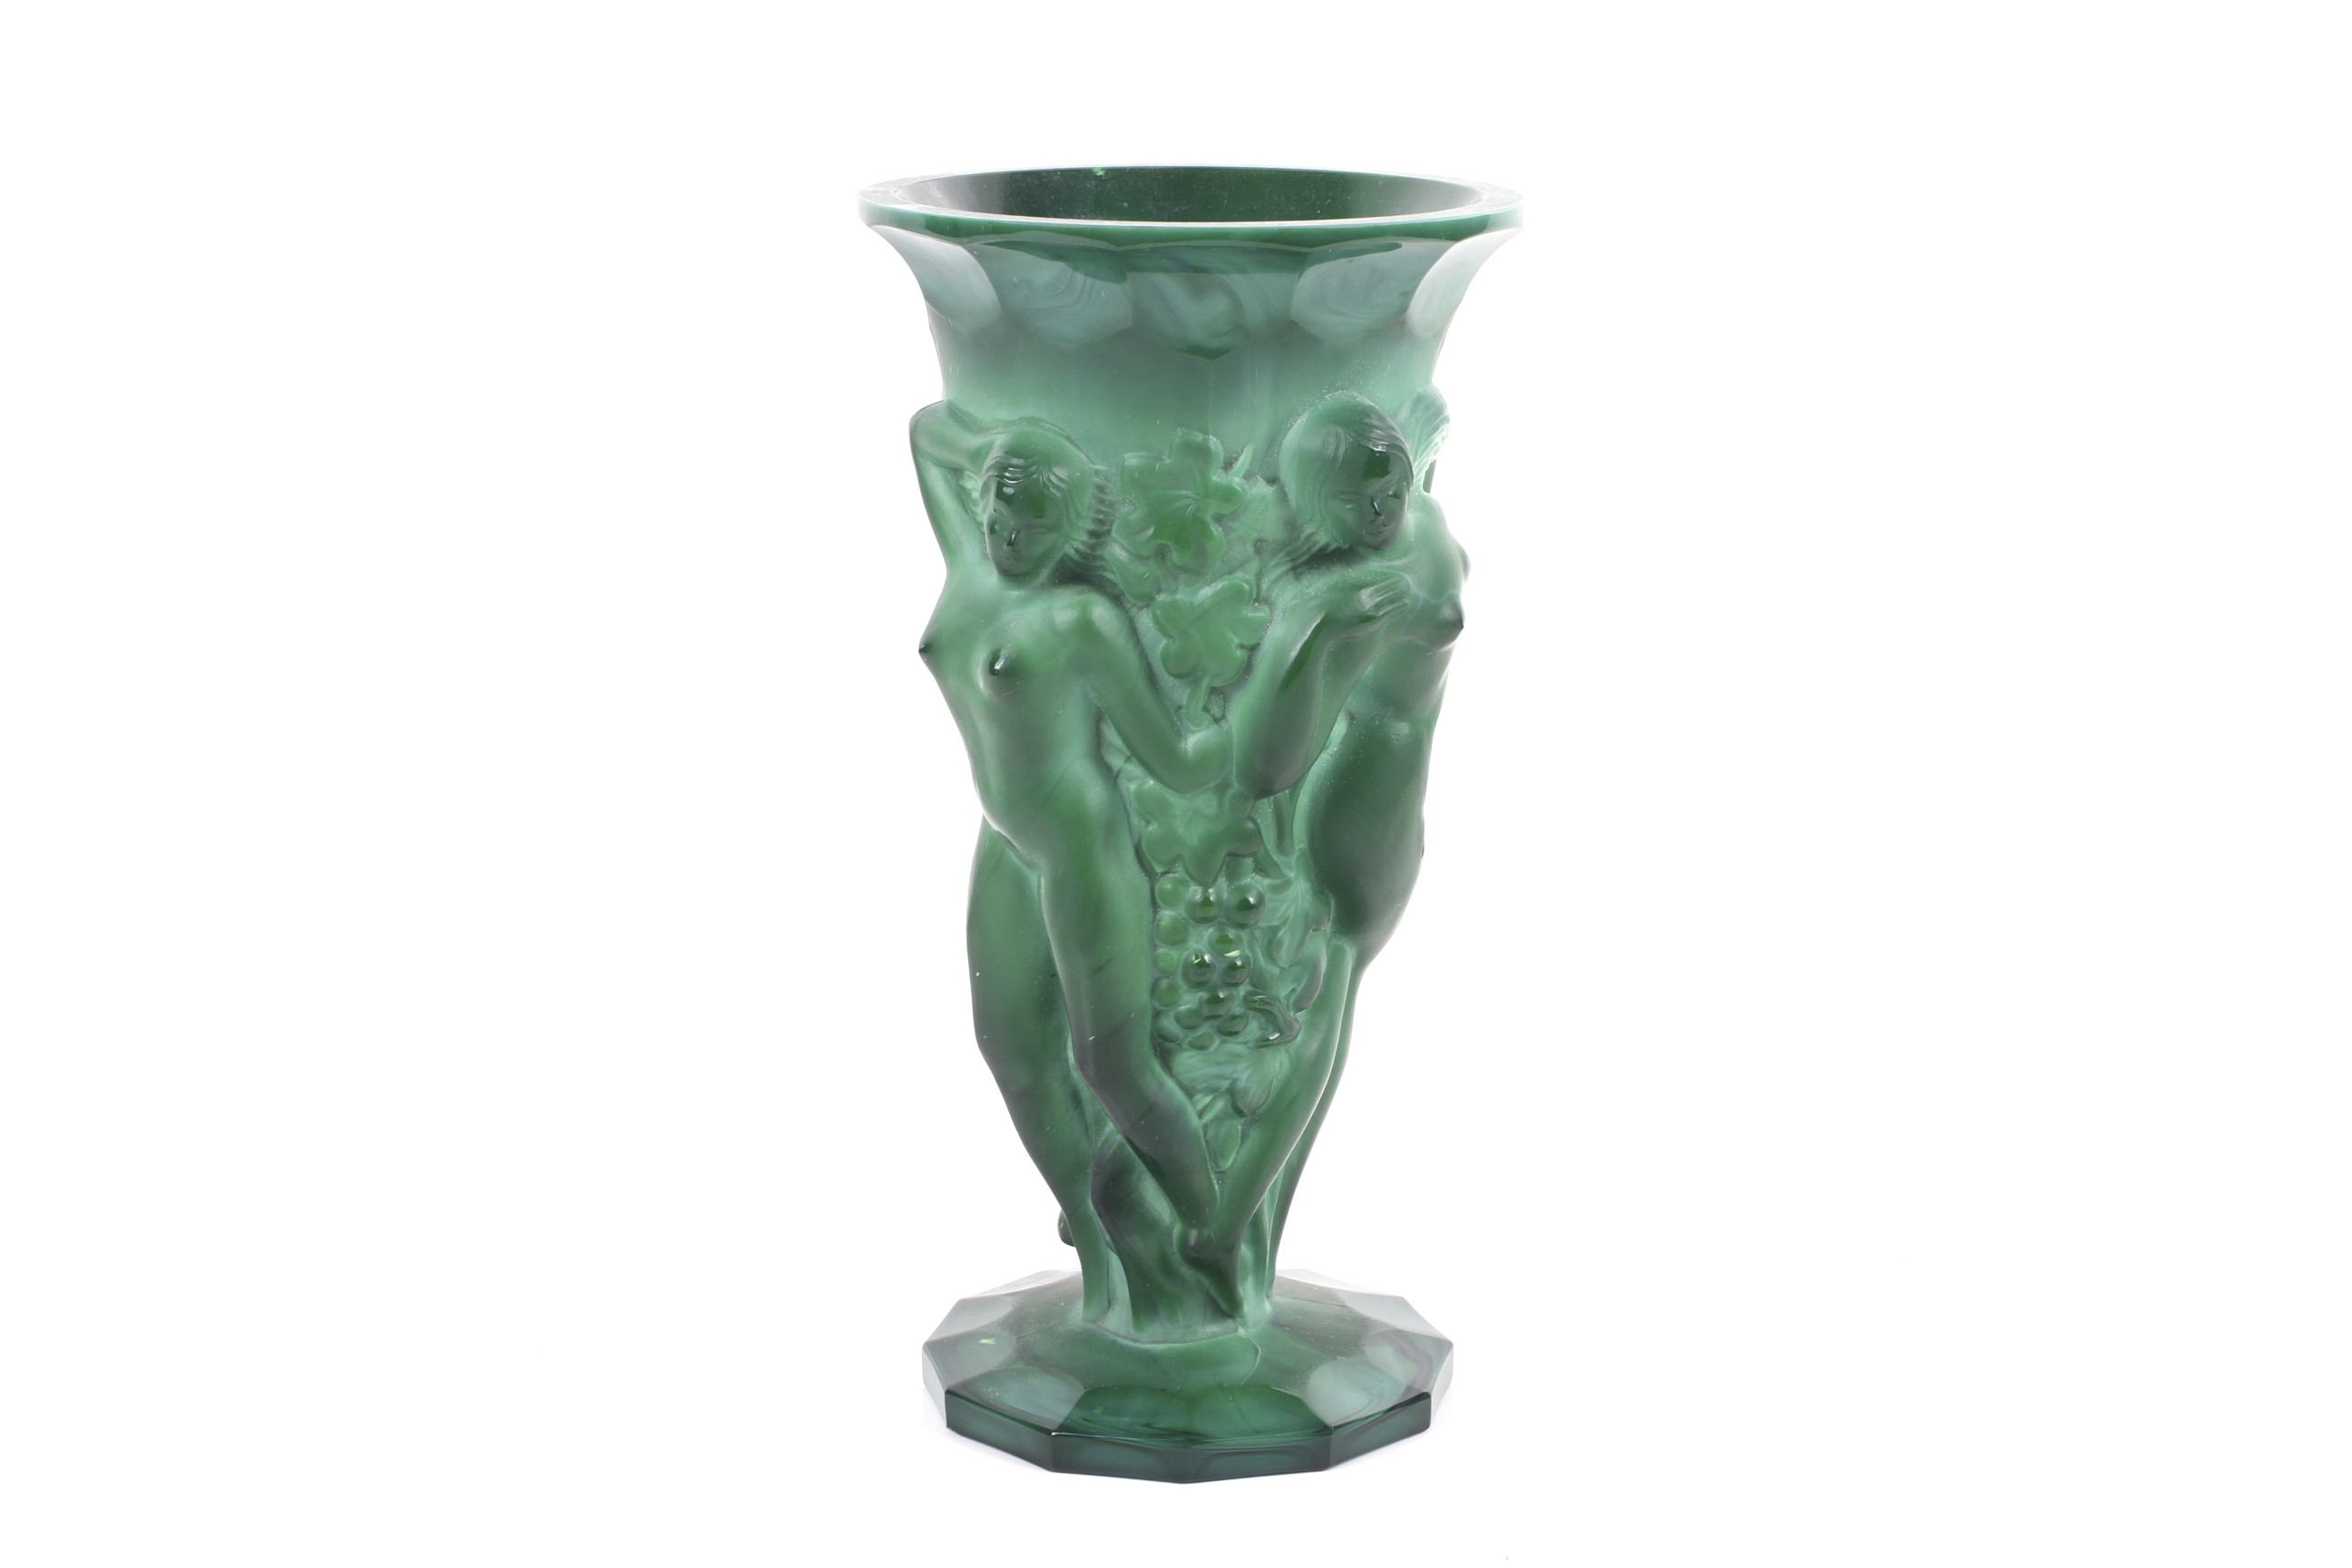 A circa 1930s Art Deco moulded green malachite glass vase, attributed to Curt Schlevoght.